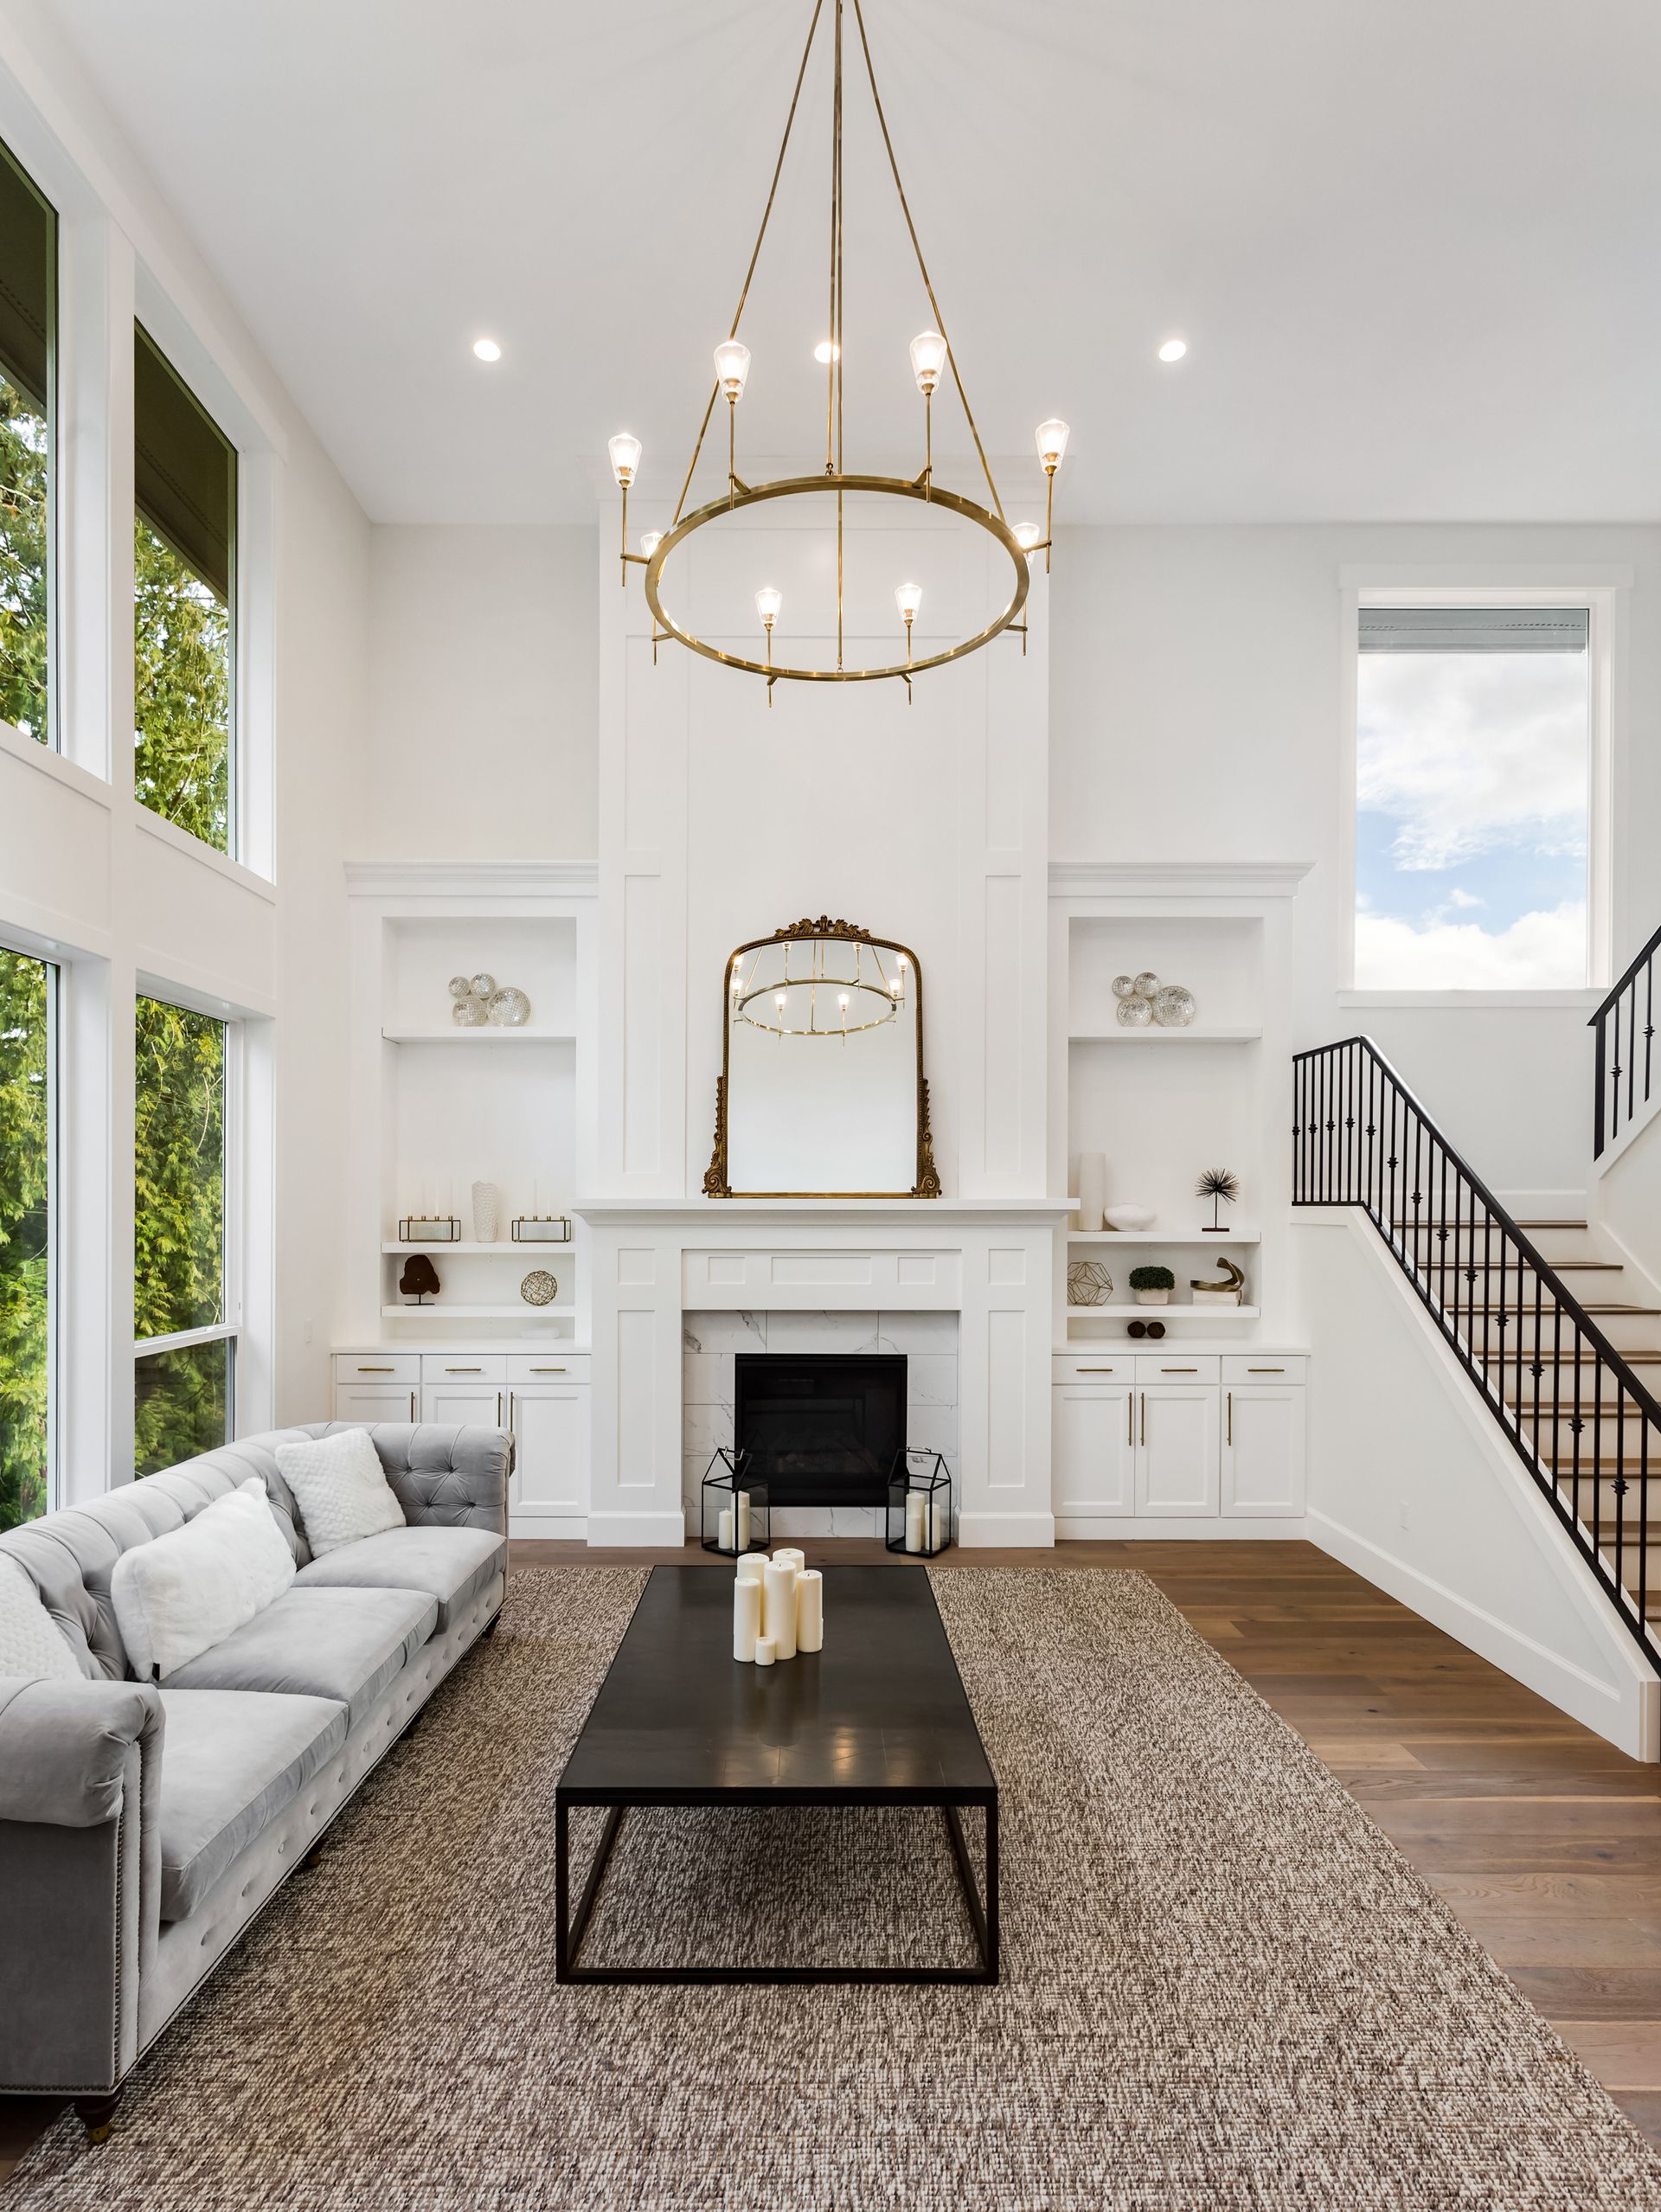 White colored living room with chandelier